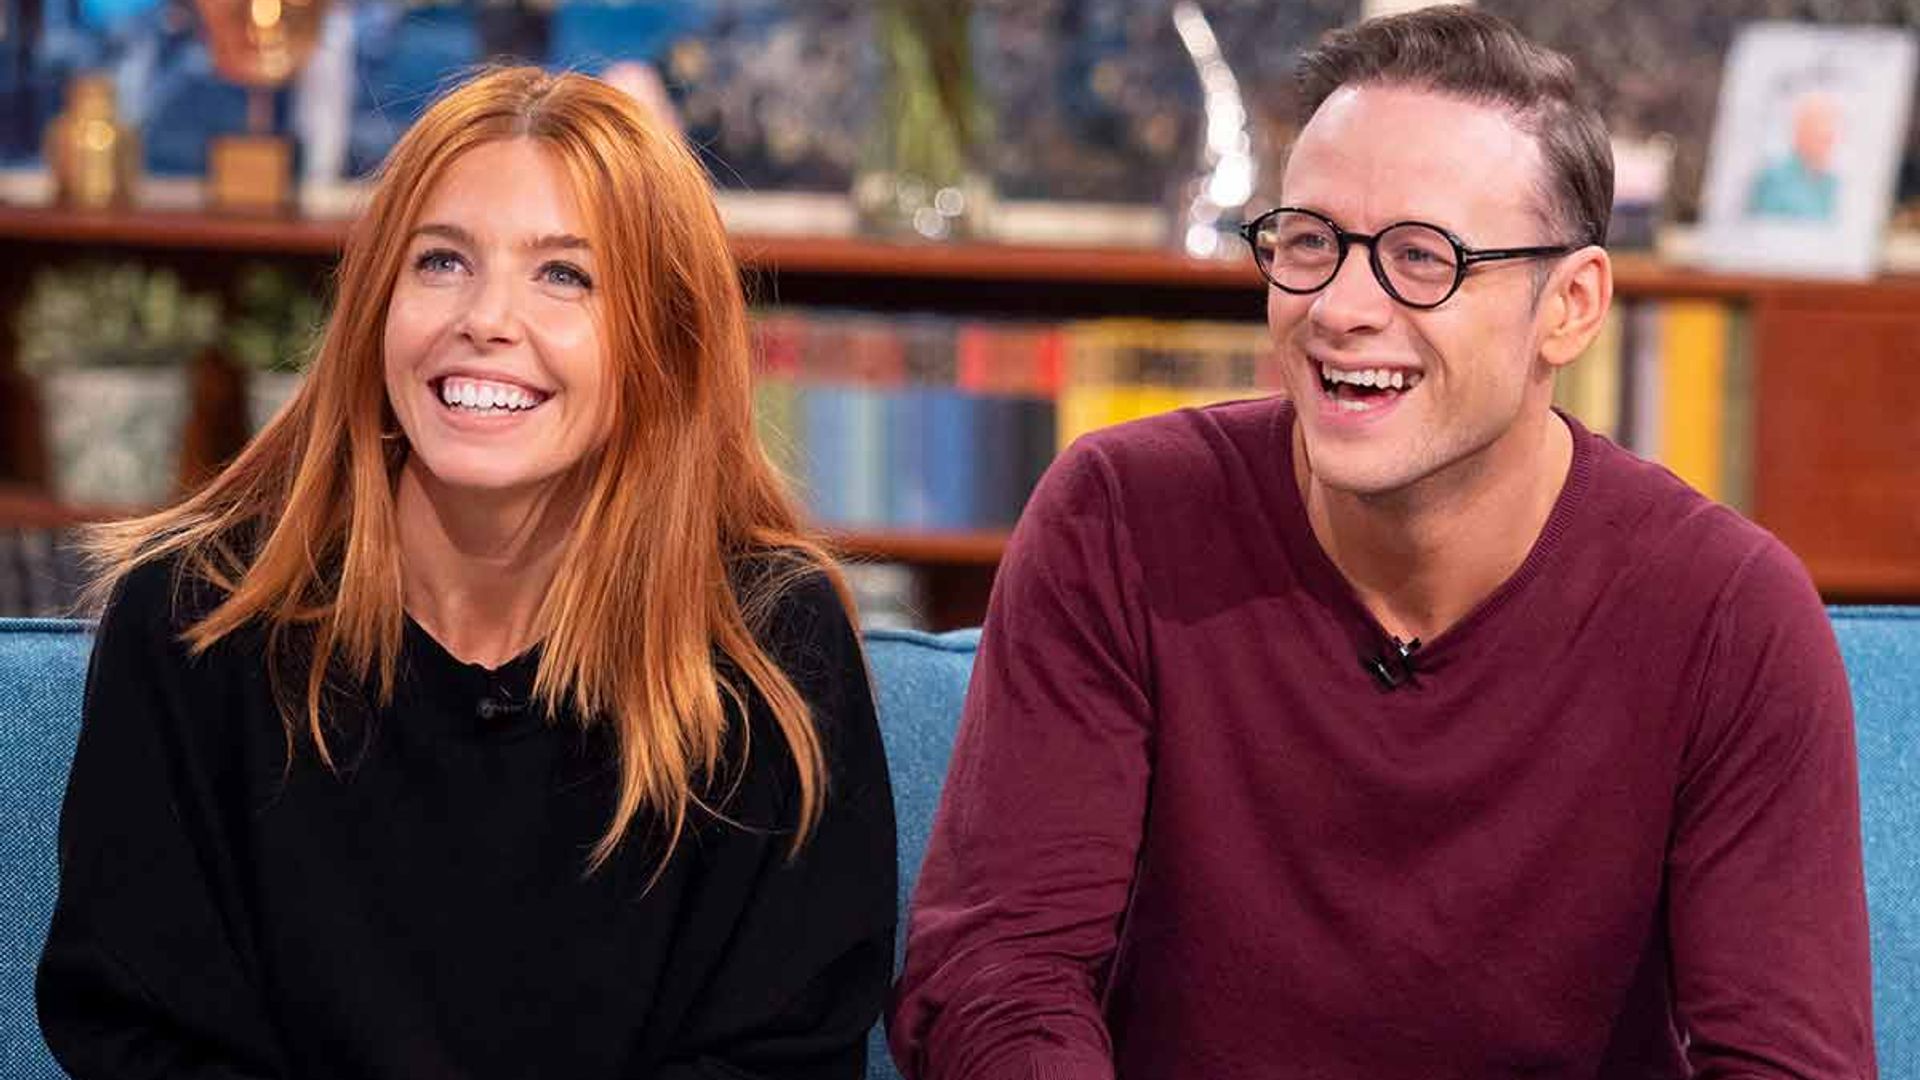 stacey-dooley-kevin-clifton-relationship